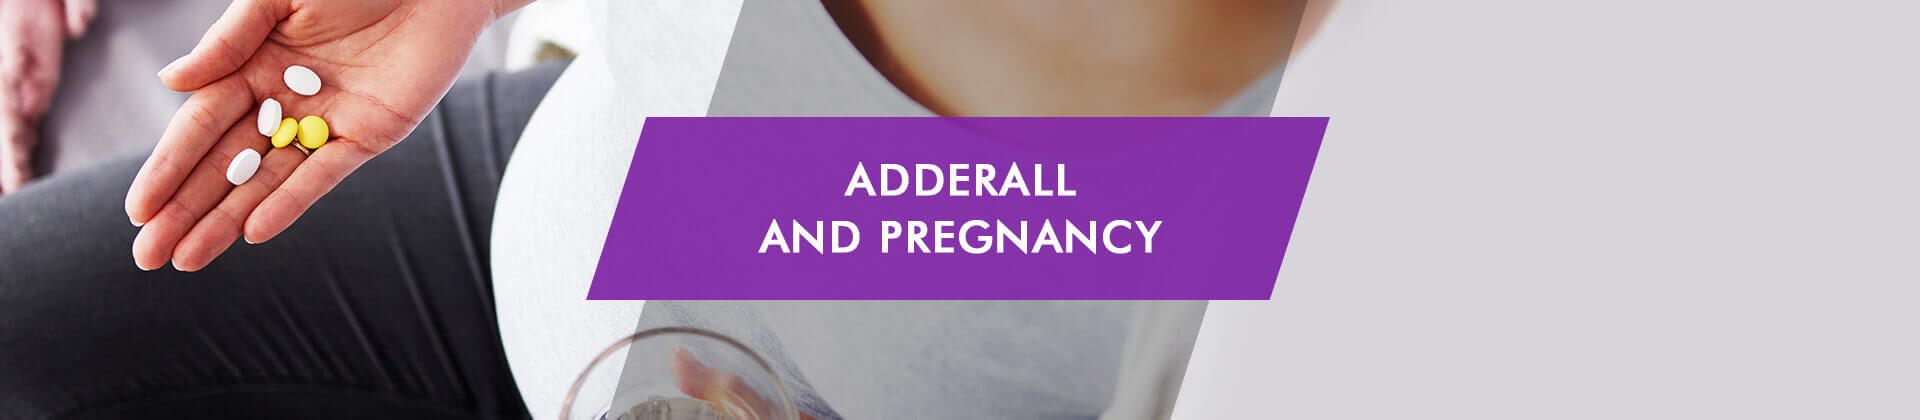 while breastfeeding of adderall effects